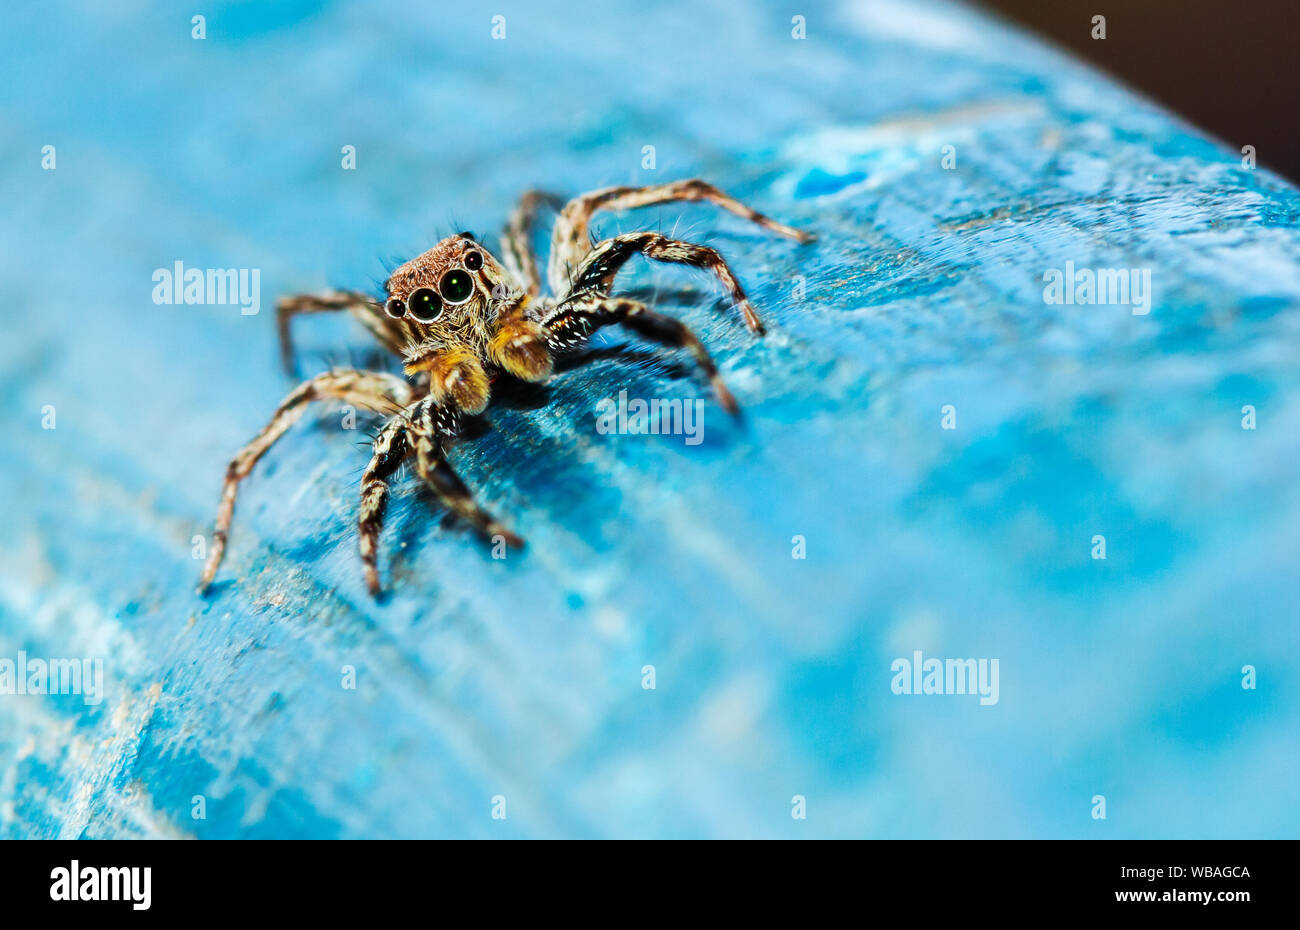 Jumping spider on blue old plastic background. Stock Photo